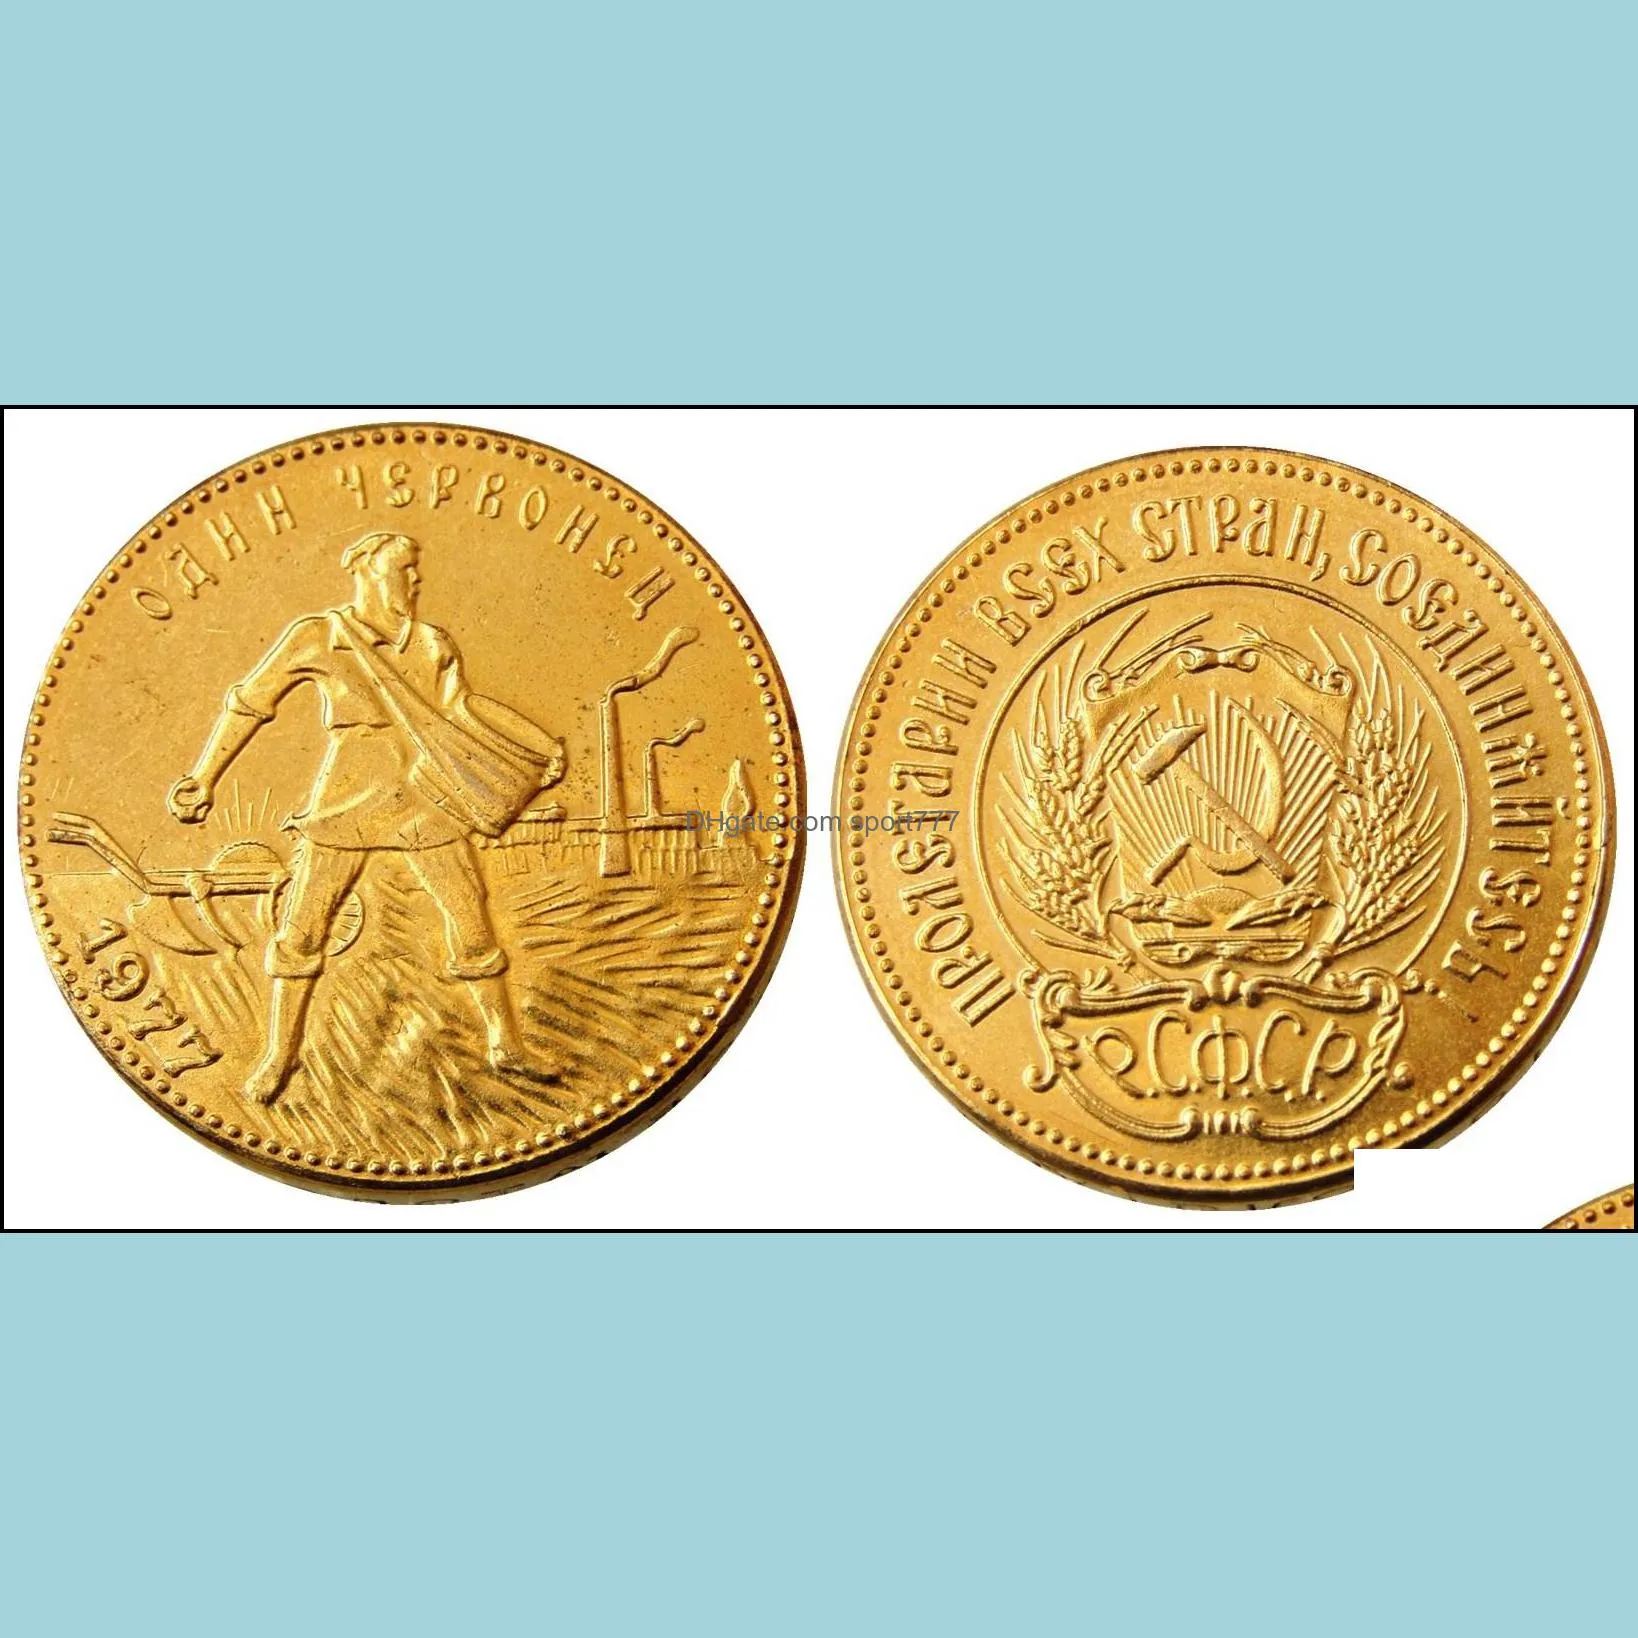 1977 soviet russian 1 chervonetz 10 roubles cccp ussr lettered edge gold plated russia coins copy